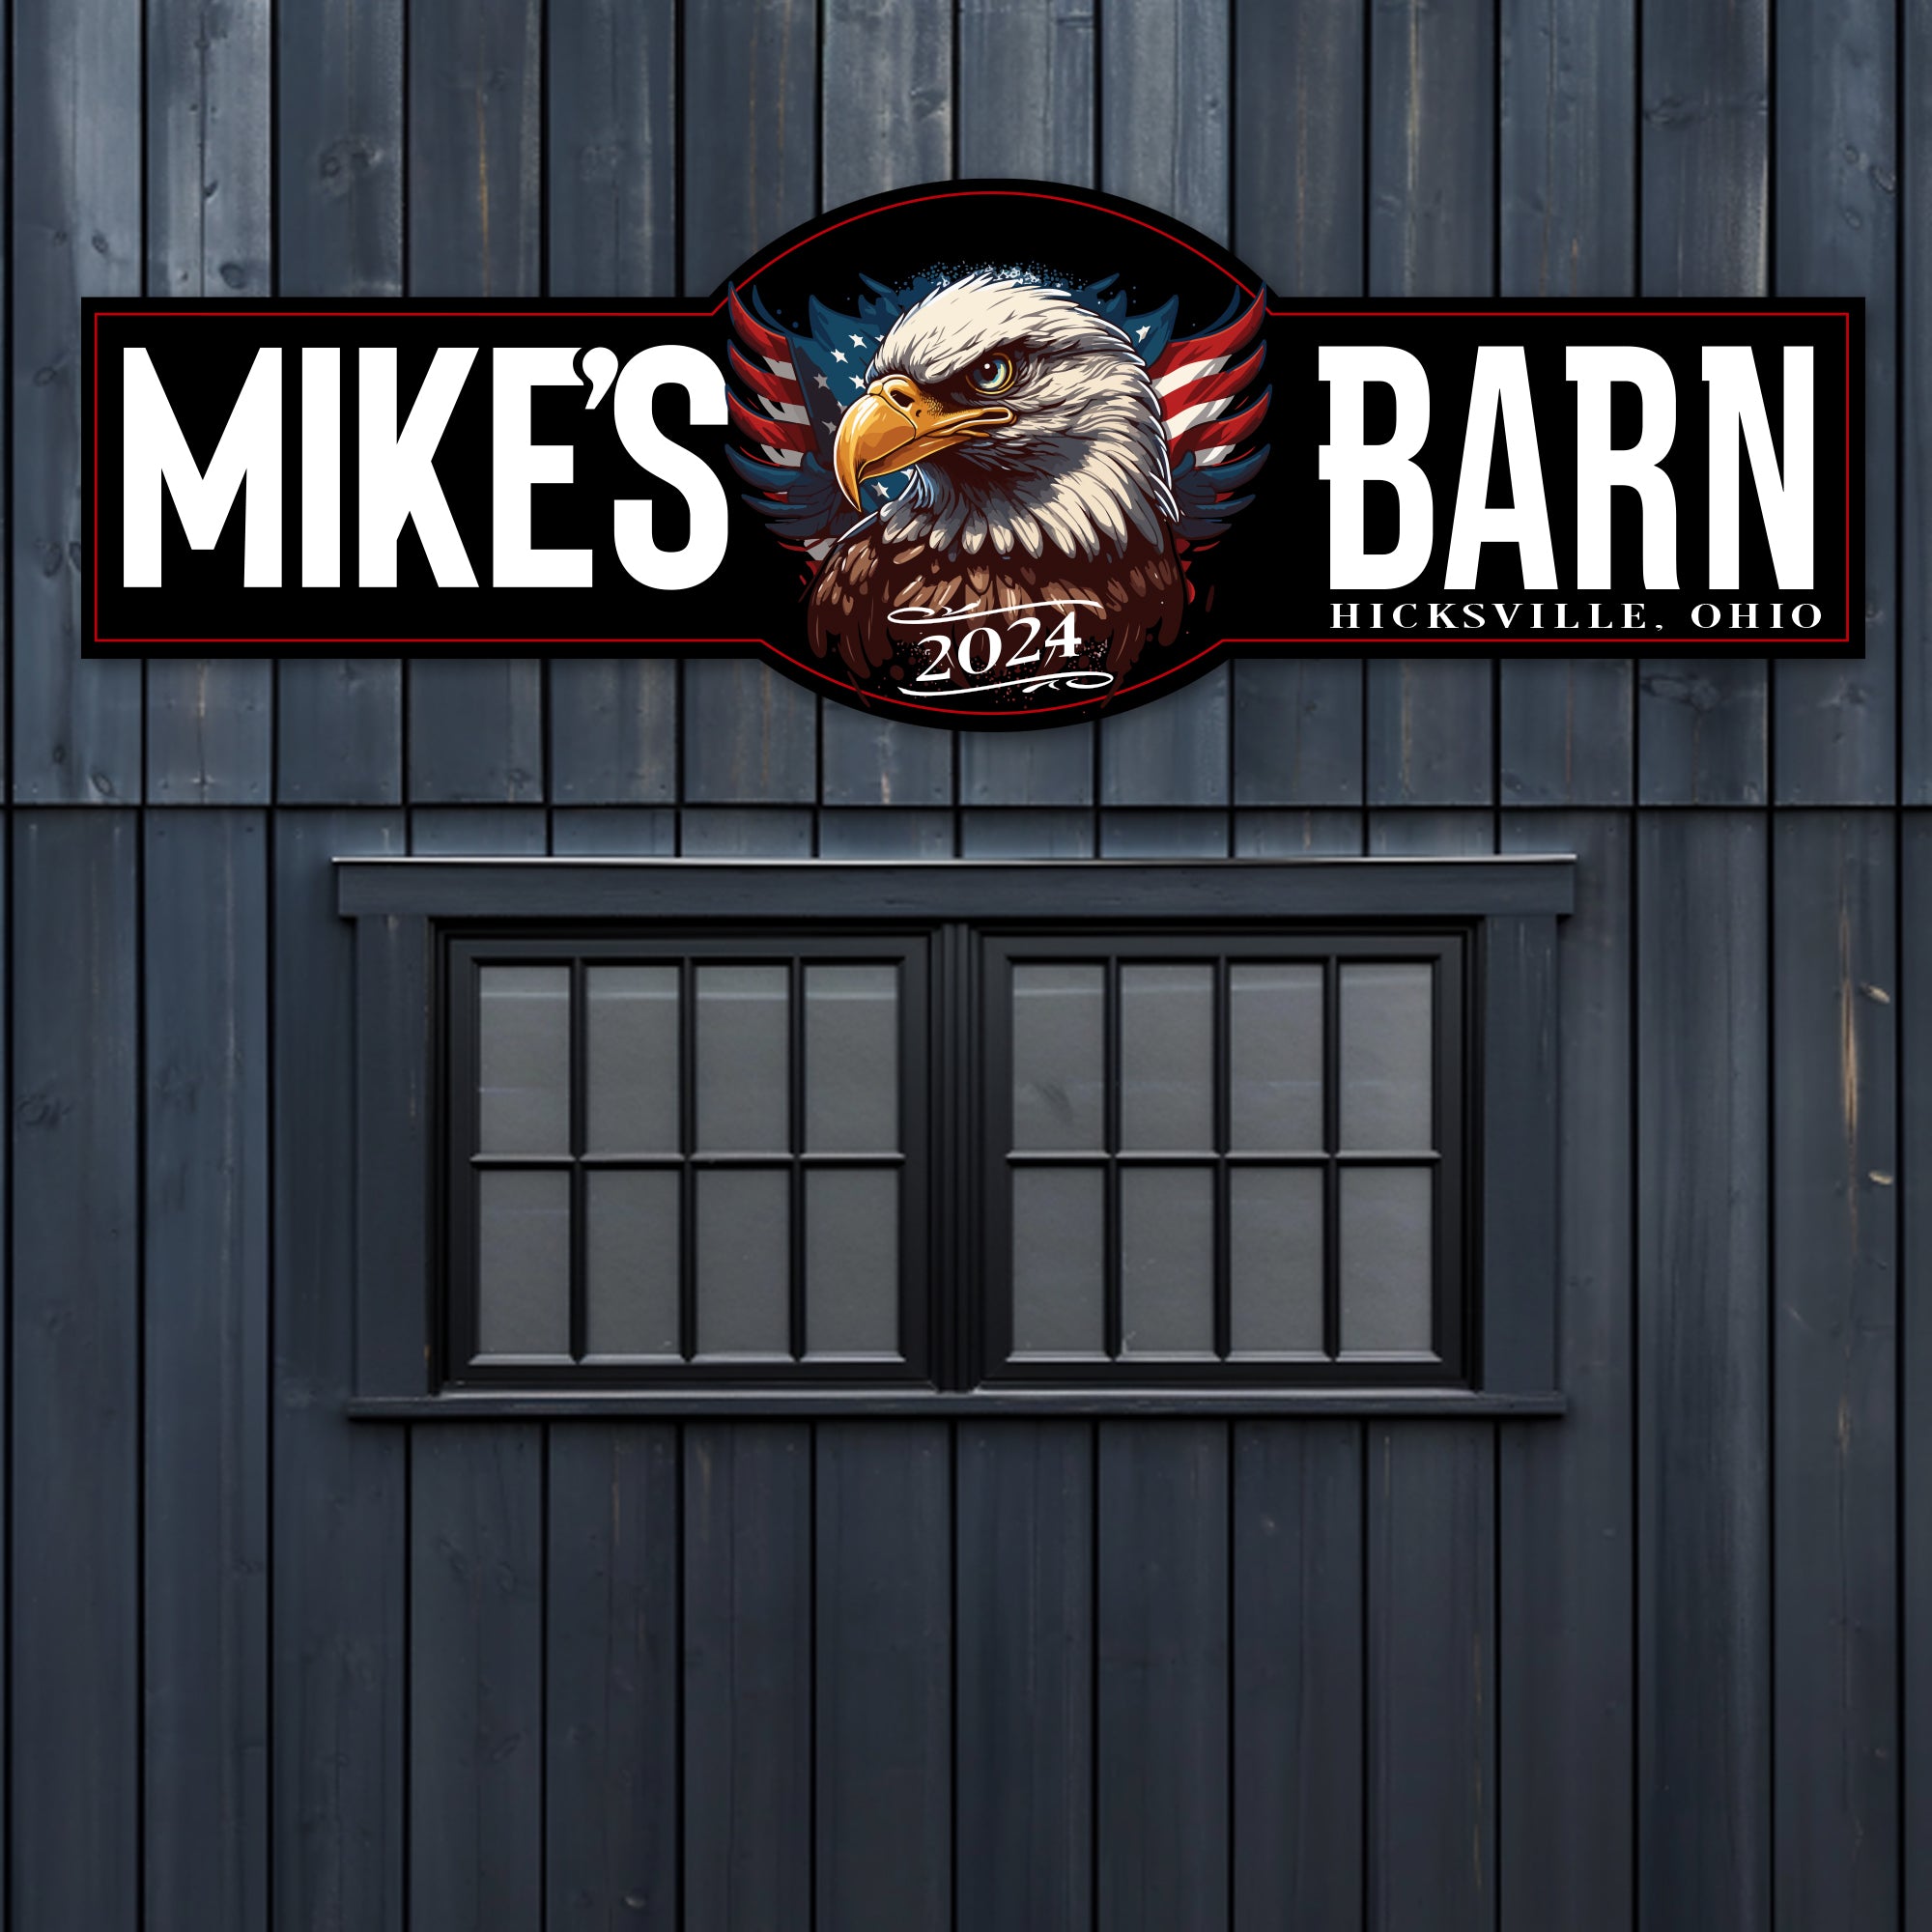 Patriotic Barn Sign with American Flag and Eagle, with Pesonalized name and city and state.